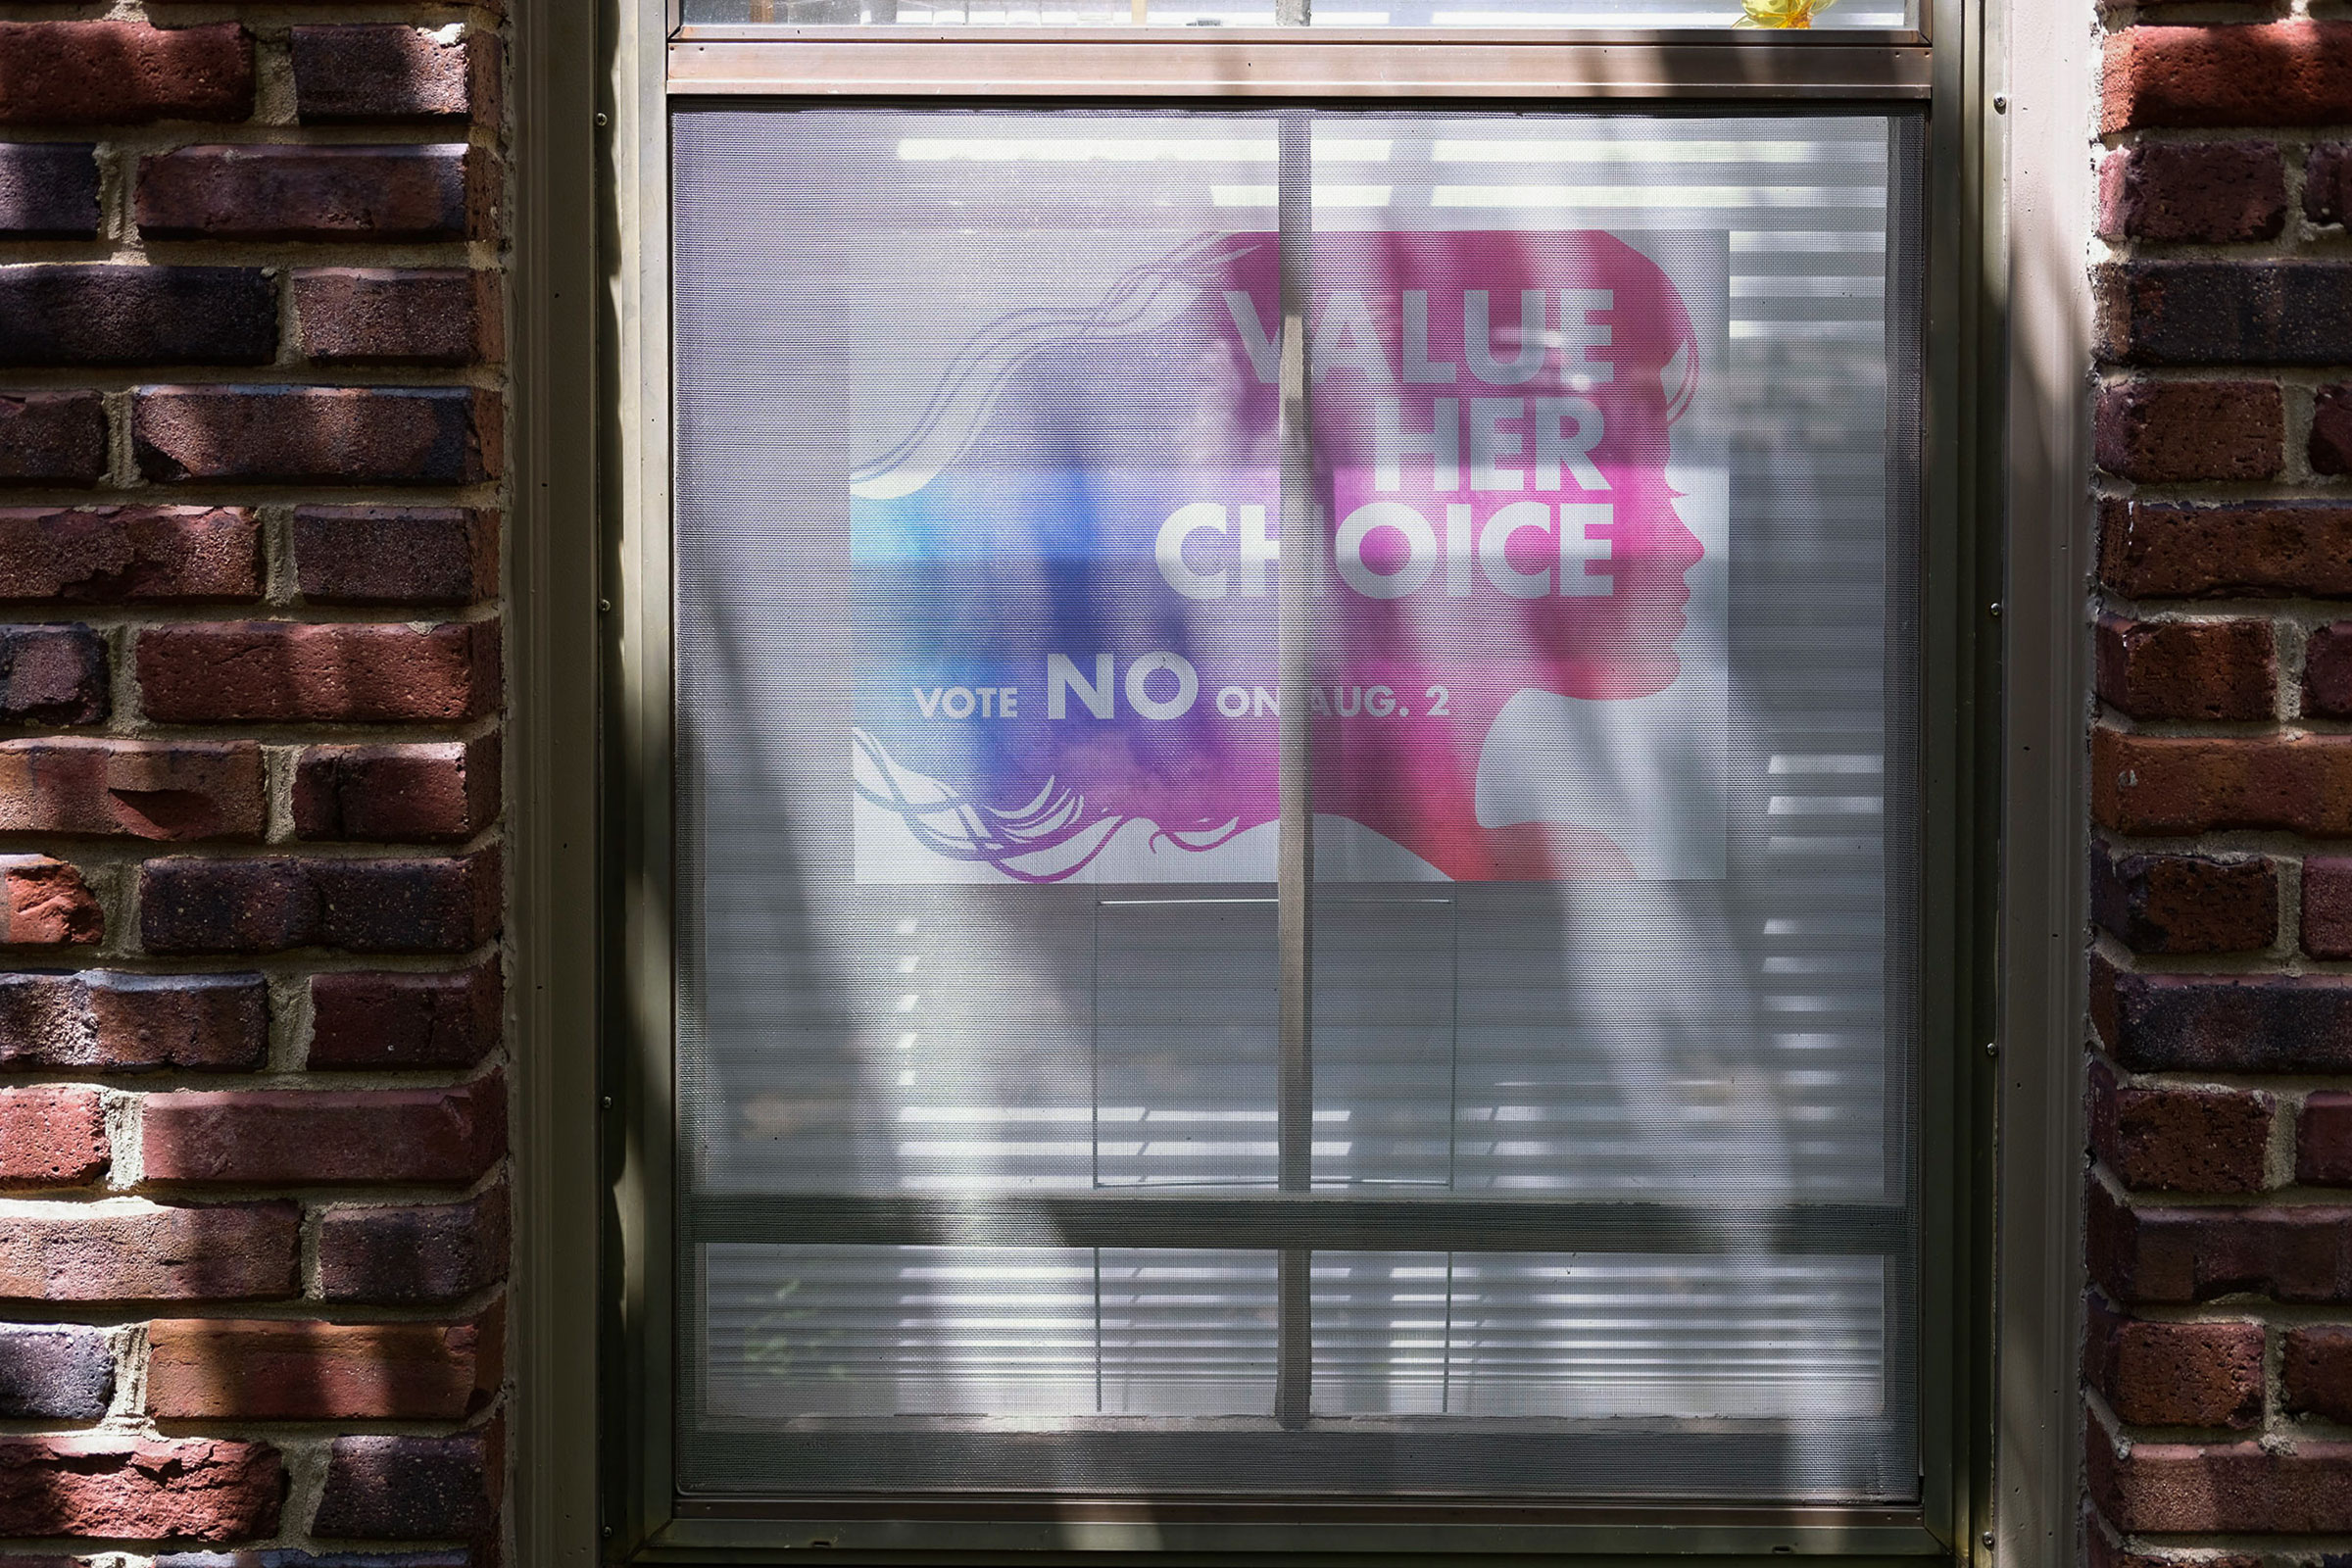 A 'Value Her Choice' sign is displayed in window of a home in Leawood. (Arin Yoon for TIME)